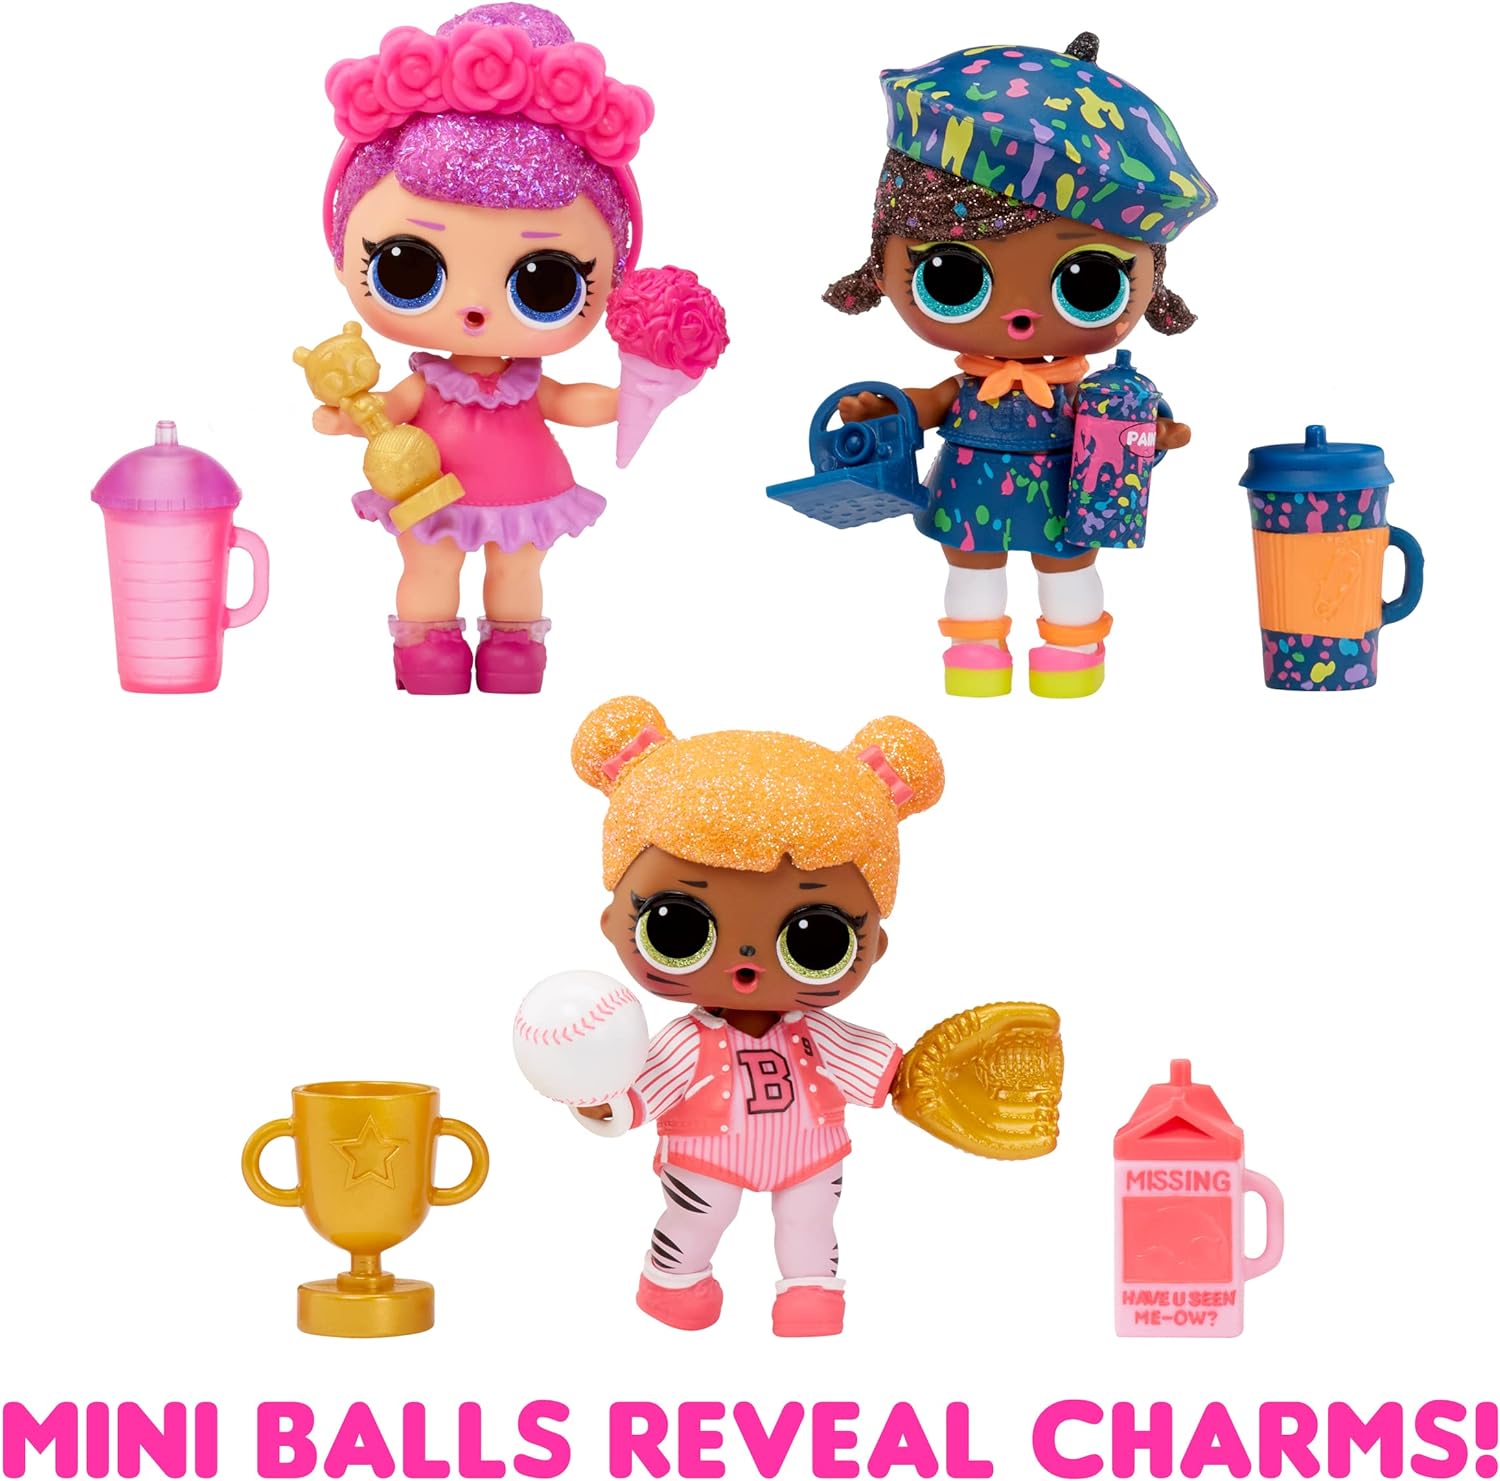 L.O.L. Surprise! Sooo Mini with Collectible Doll, 8 Surprises, Mini L.O.L. Surprise! Balls, Limited Edition Dolls- Great Gift for Girls Age 4+